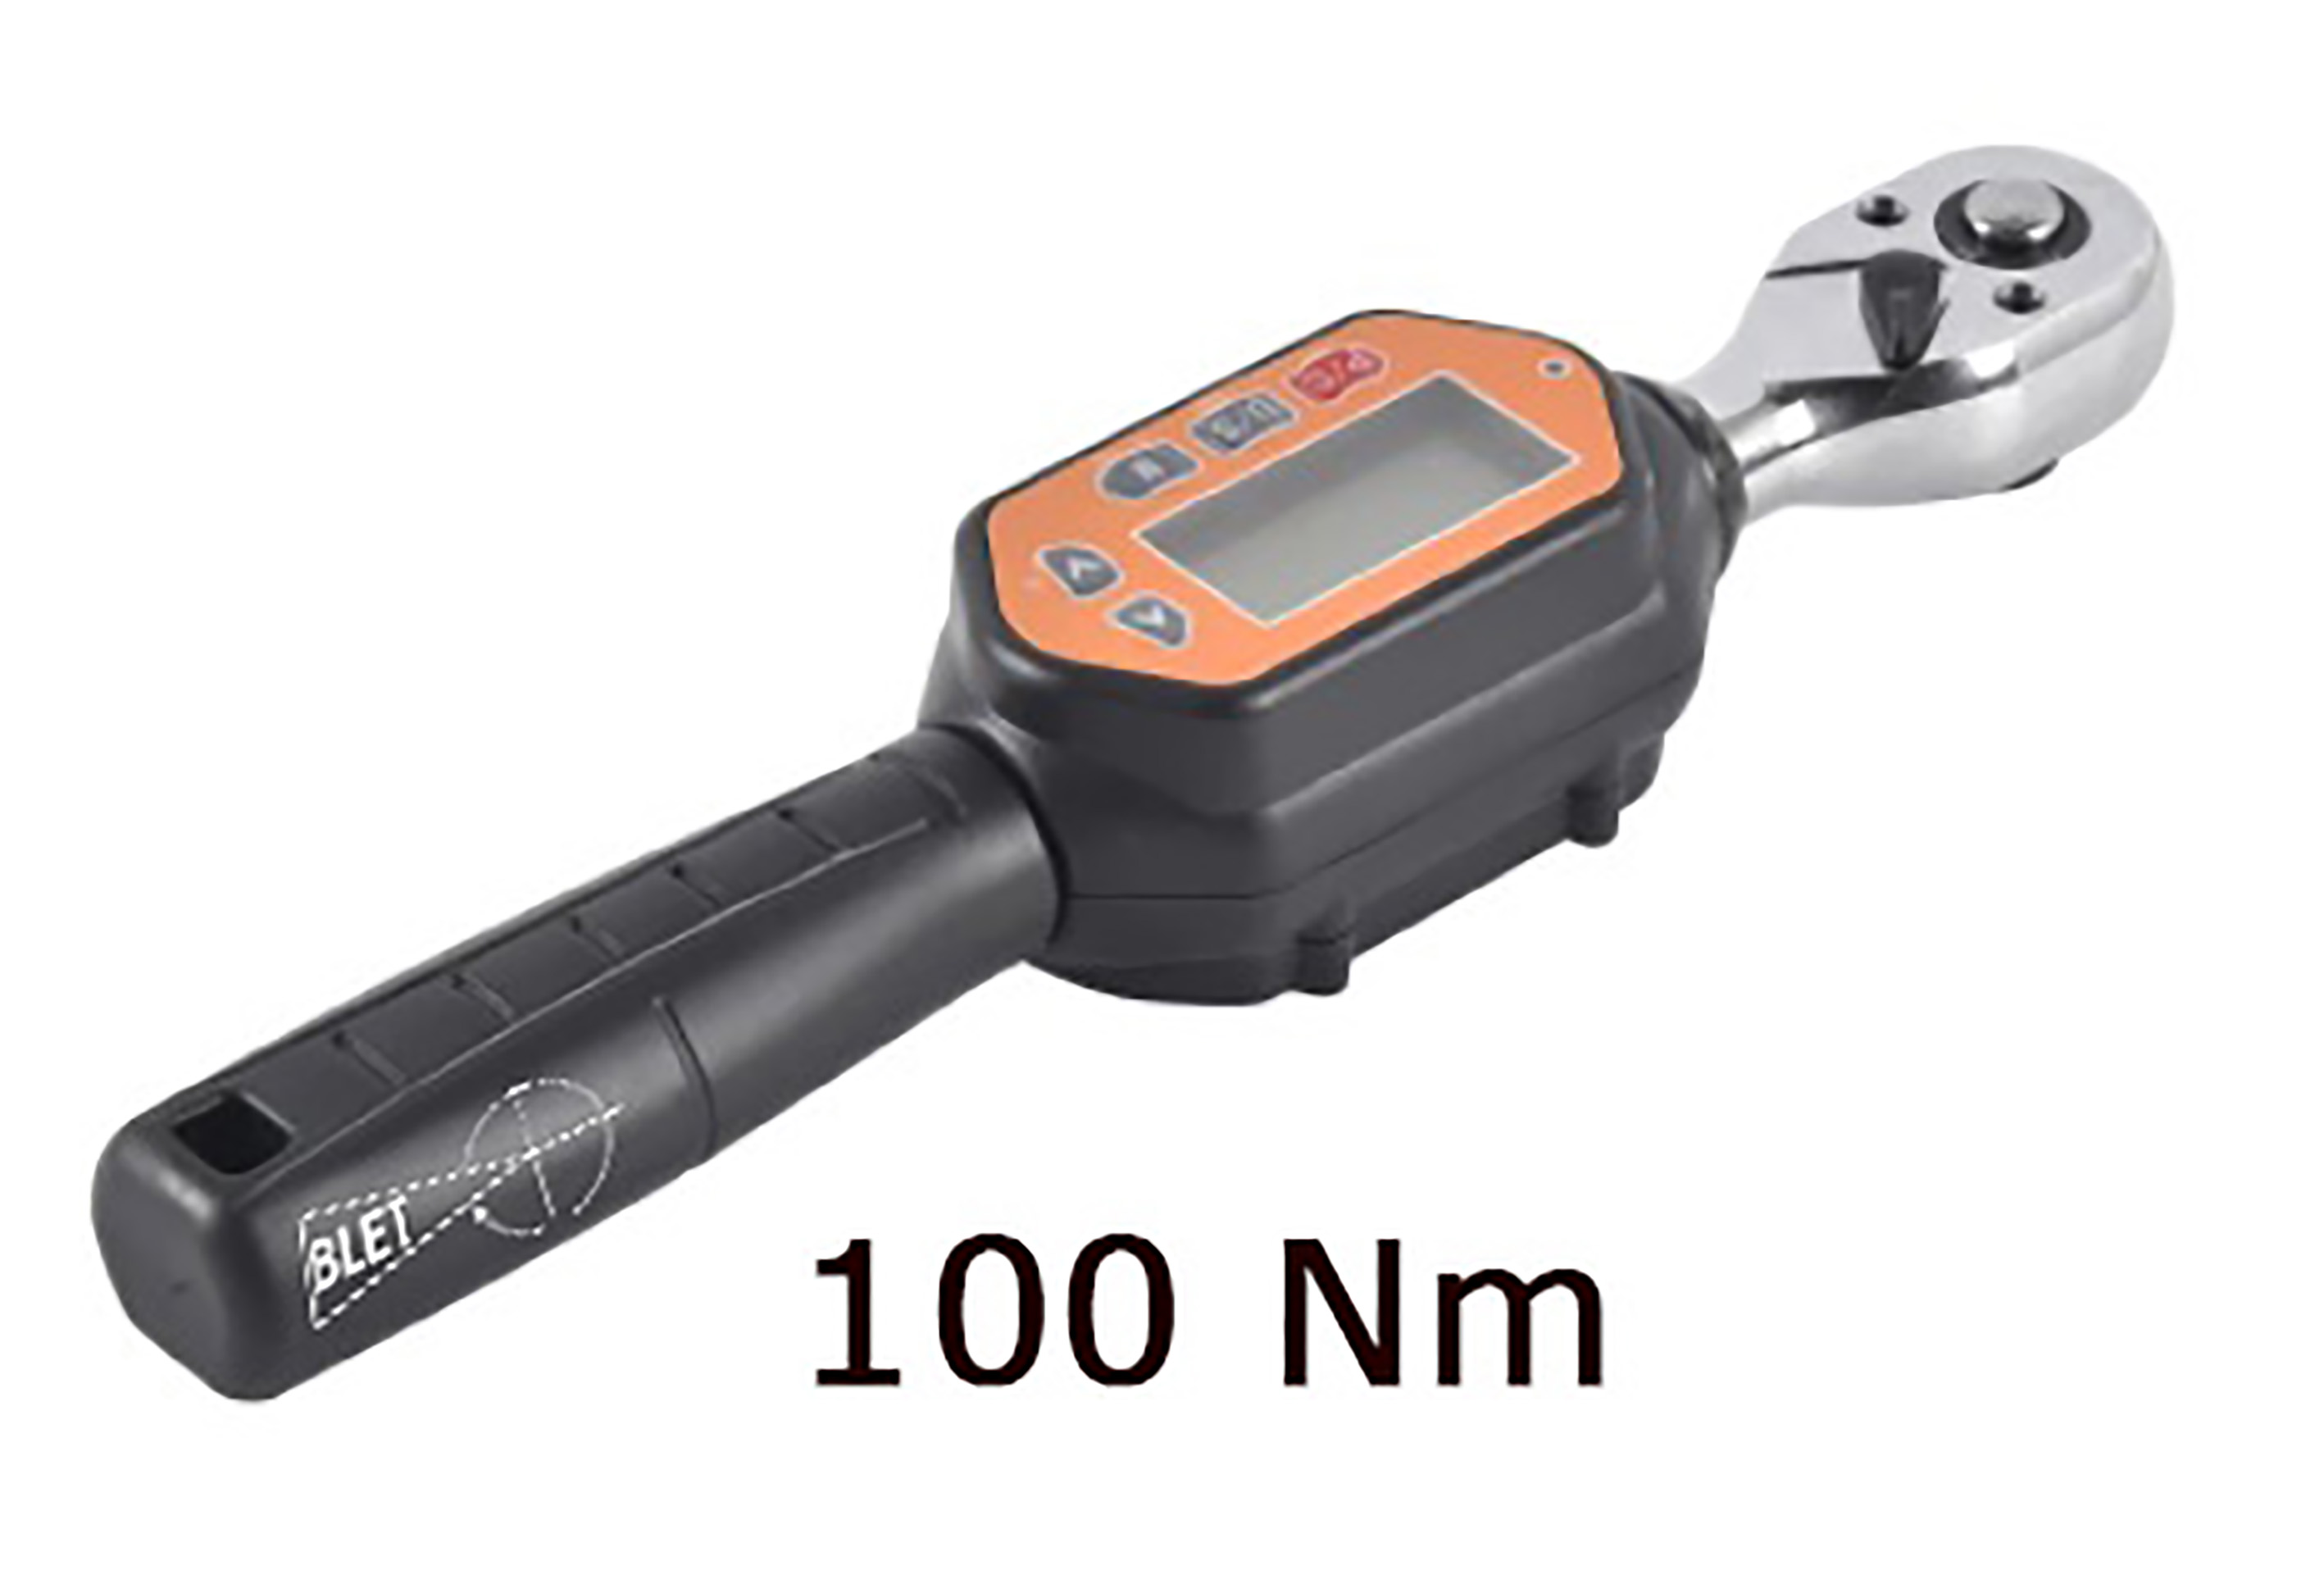 COMPACT DIGITAL TORQUE WRENCH 3-100 Nm READING 0,1 Nm SIZE 1/2" BLET<br>Ref : CLET5-CDM10012